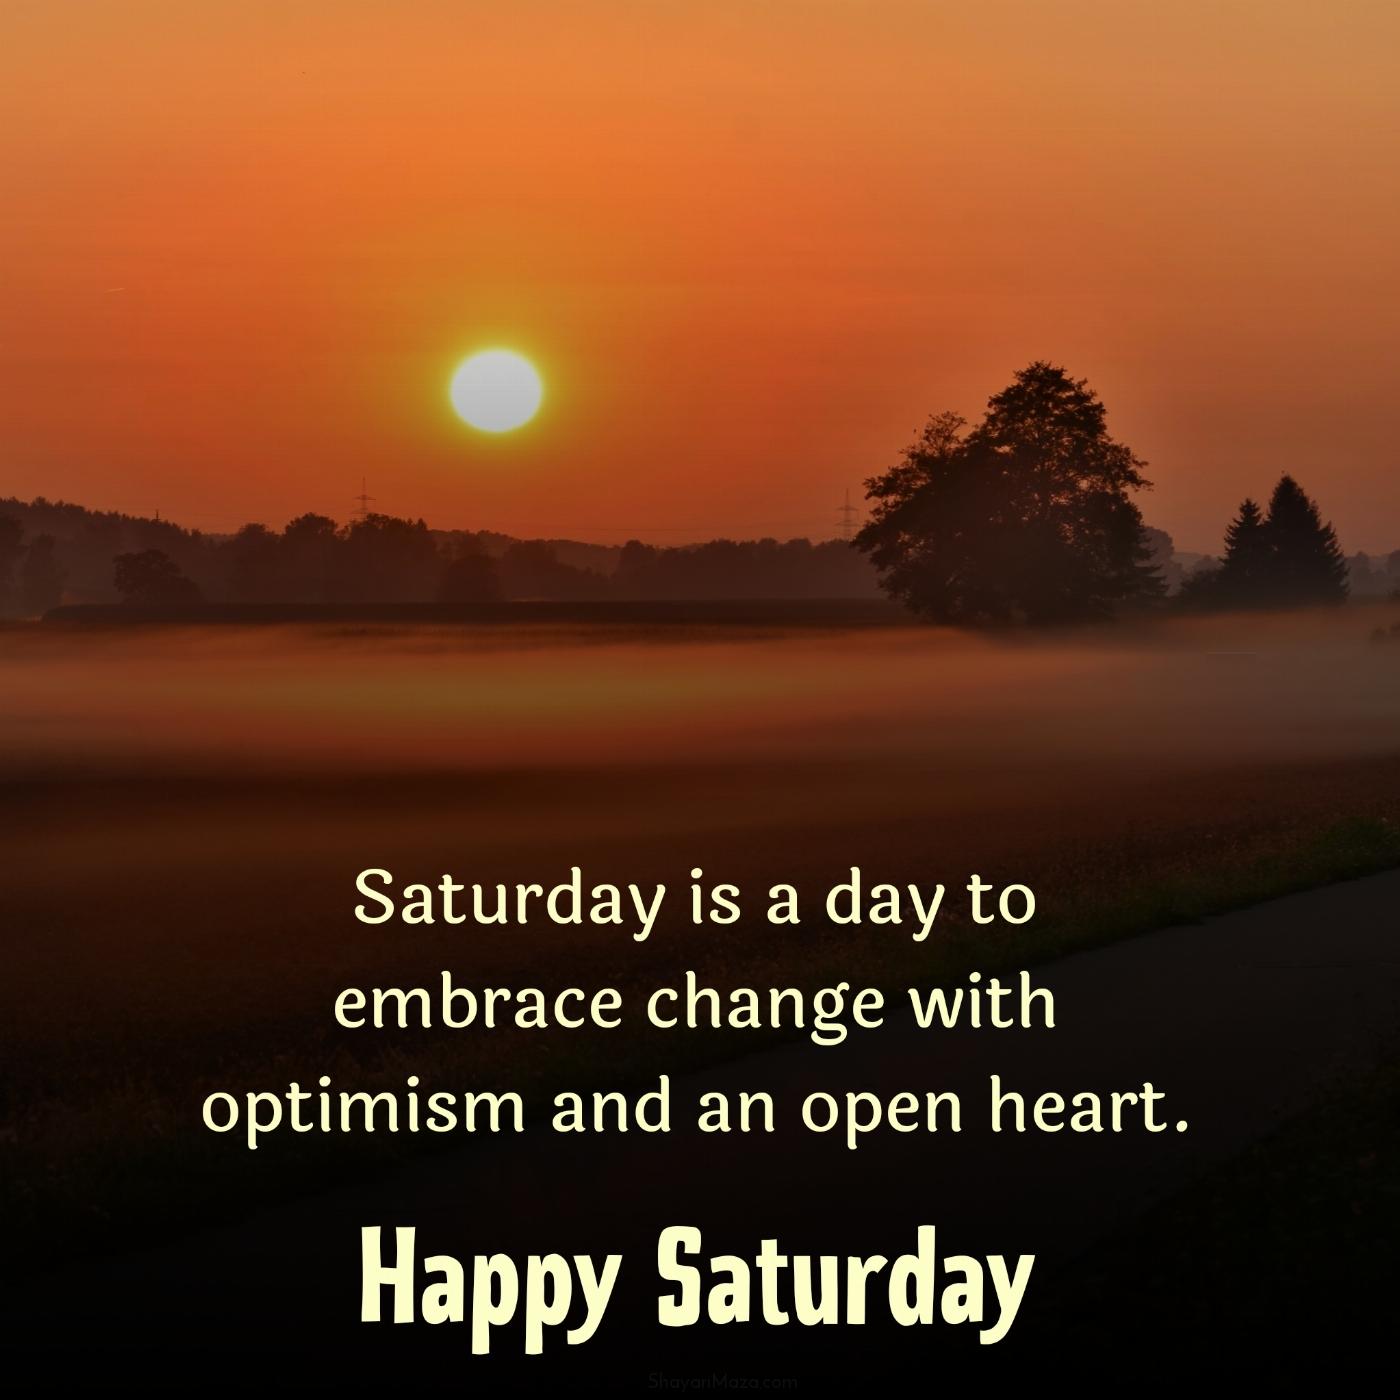 Saturday is a day to embrace change with optimism